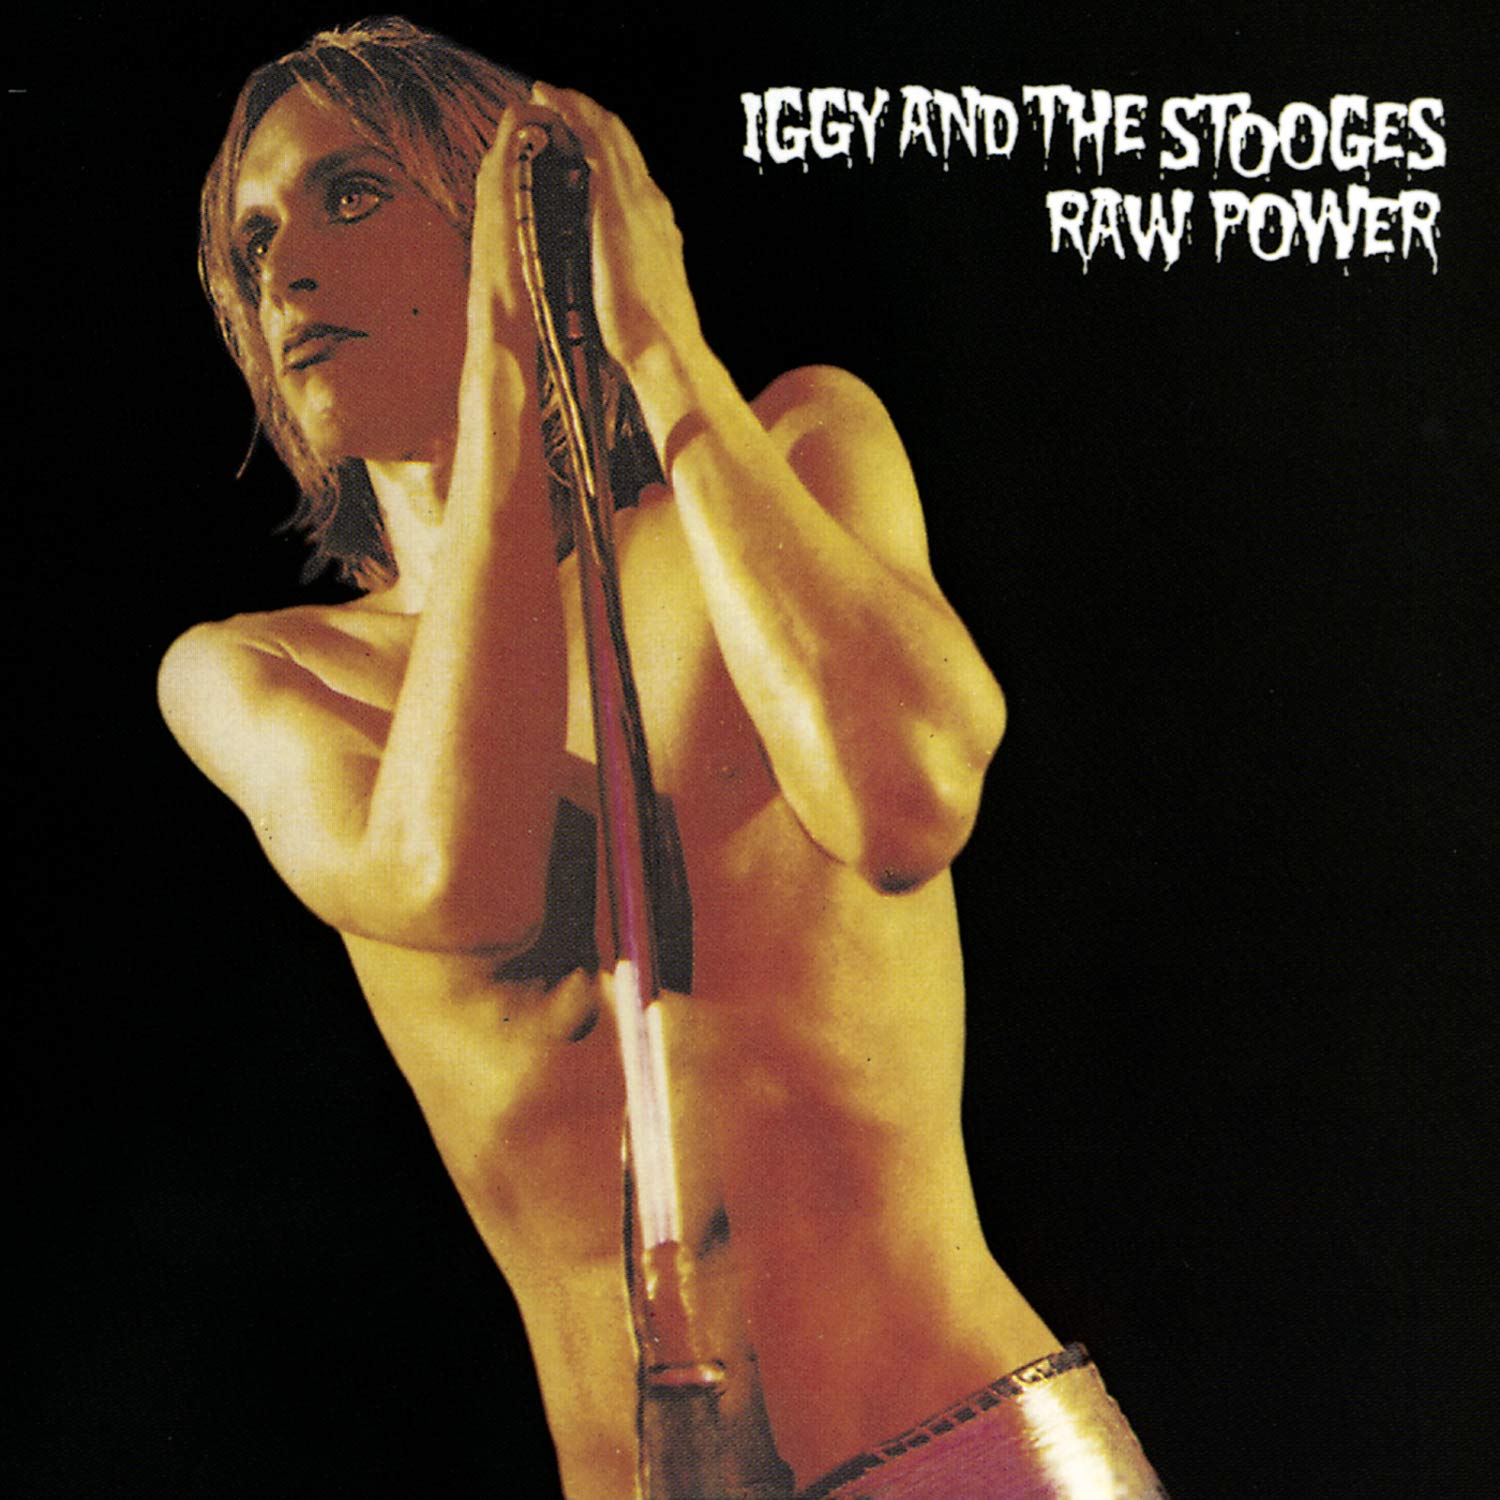 Iggy & The Stooges - Raw Power - BROKEN 8 RECORDS